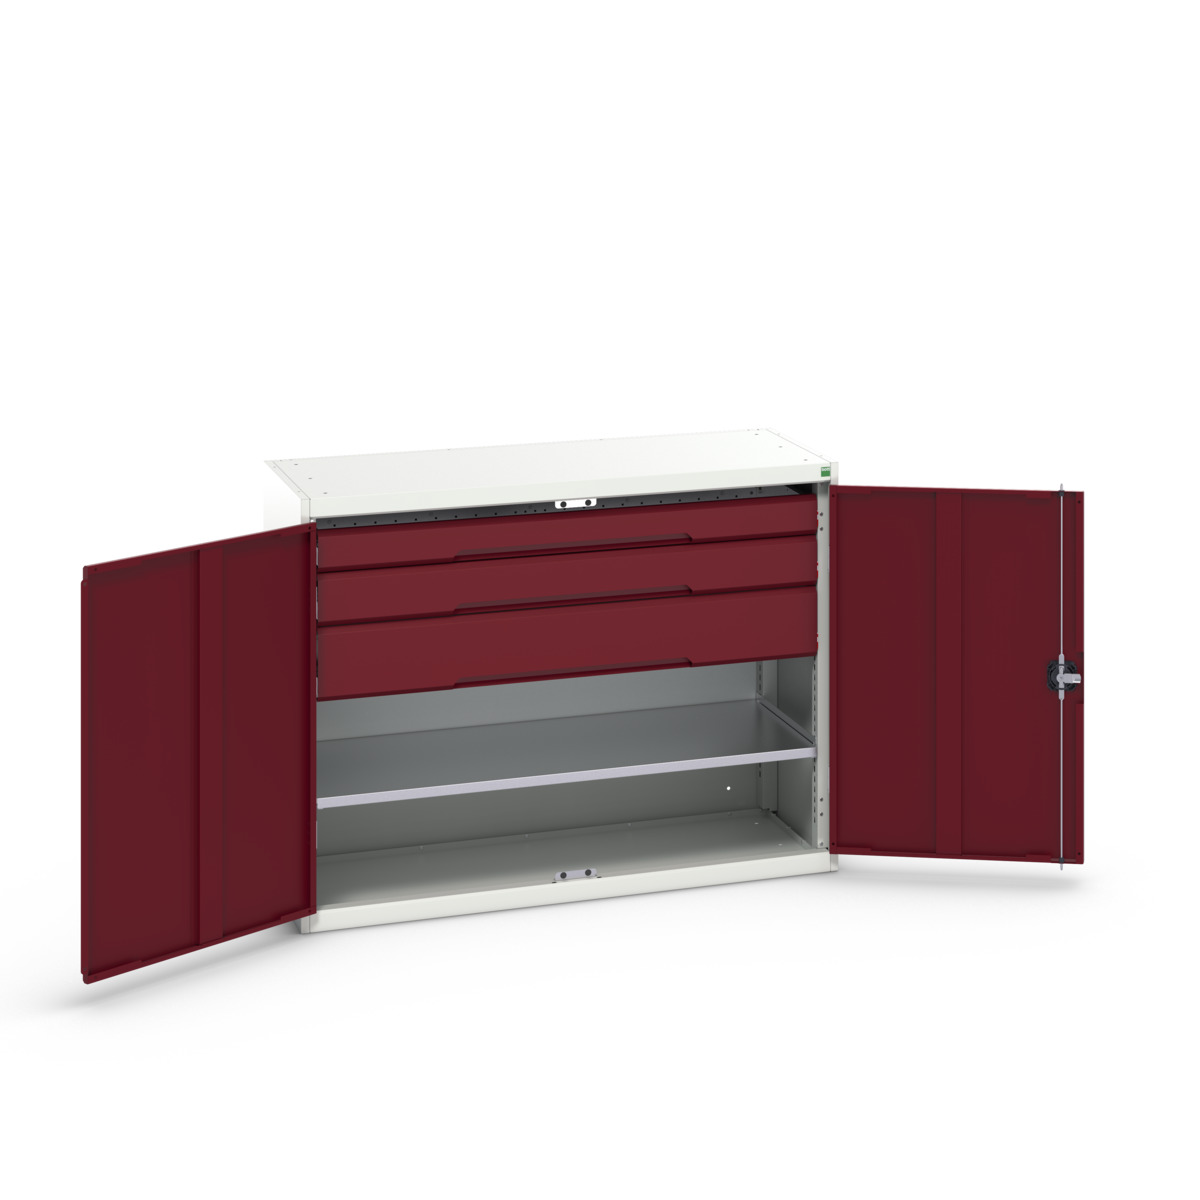 16926607.24 - verso kitted cupboard